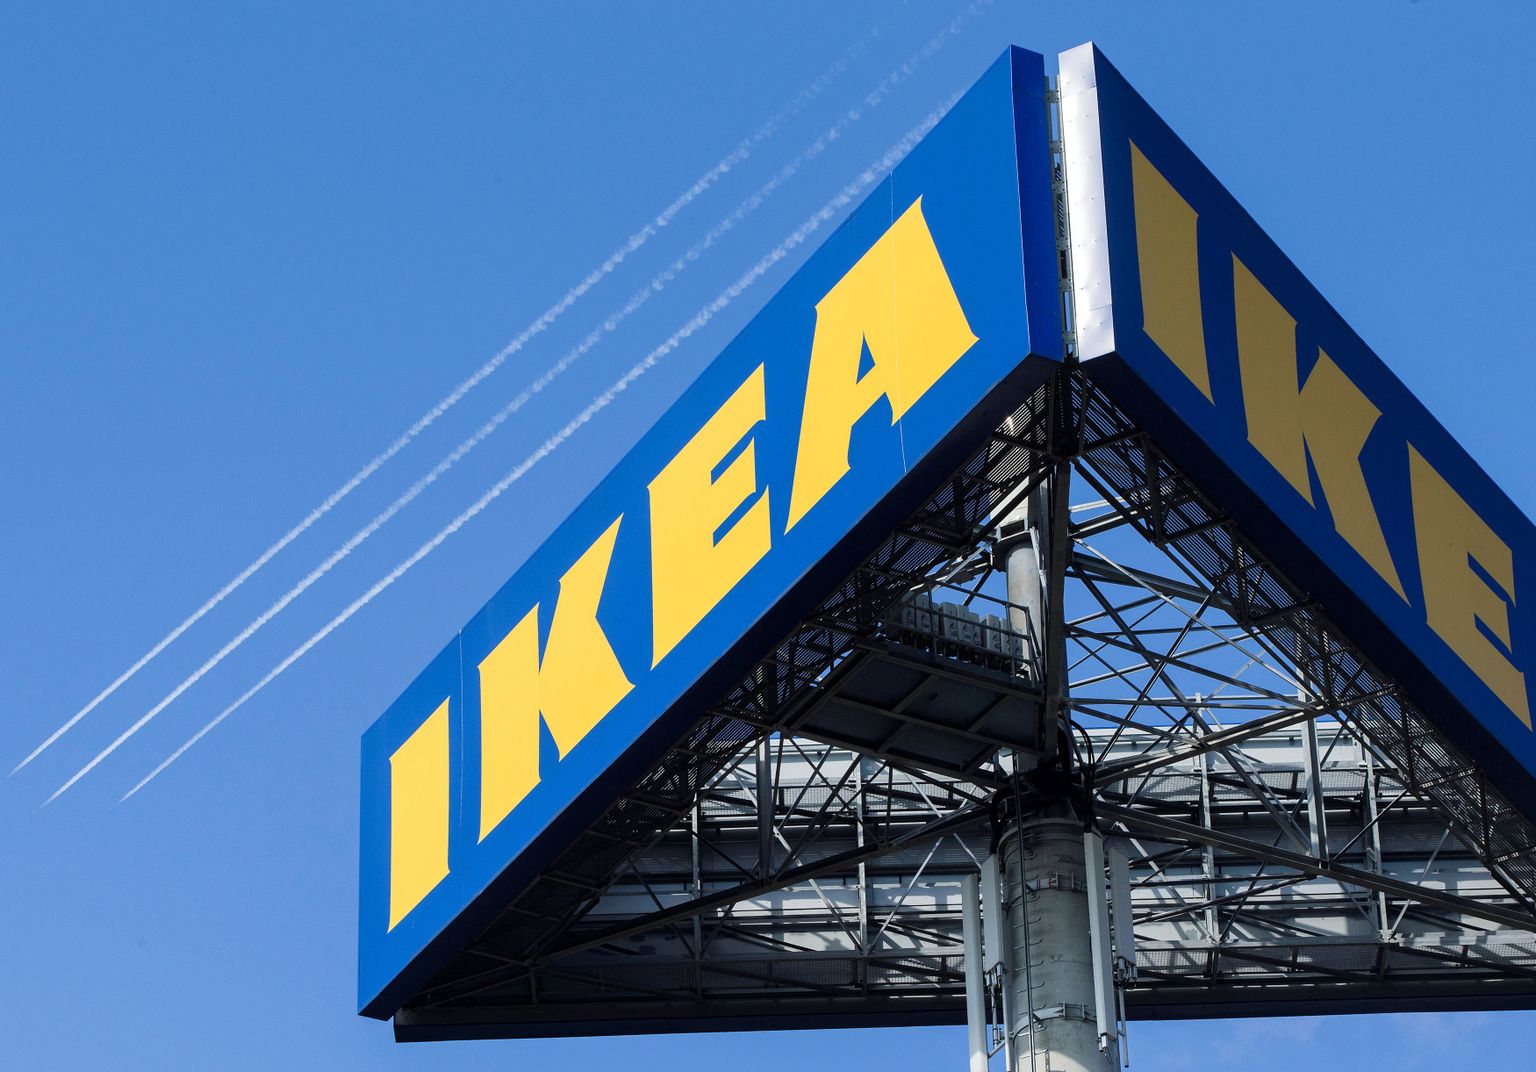 The IKEA logo is seen outside IKEA Concept Center, a furniture store and headquarters of the IKEA brand owner Inter IKEA, in Delft, the Netherlands March 16, 2016.   REUTERS/Yves Herman/File Photo